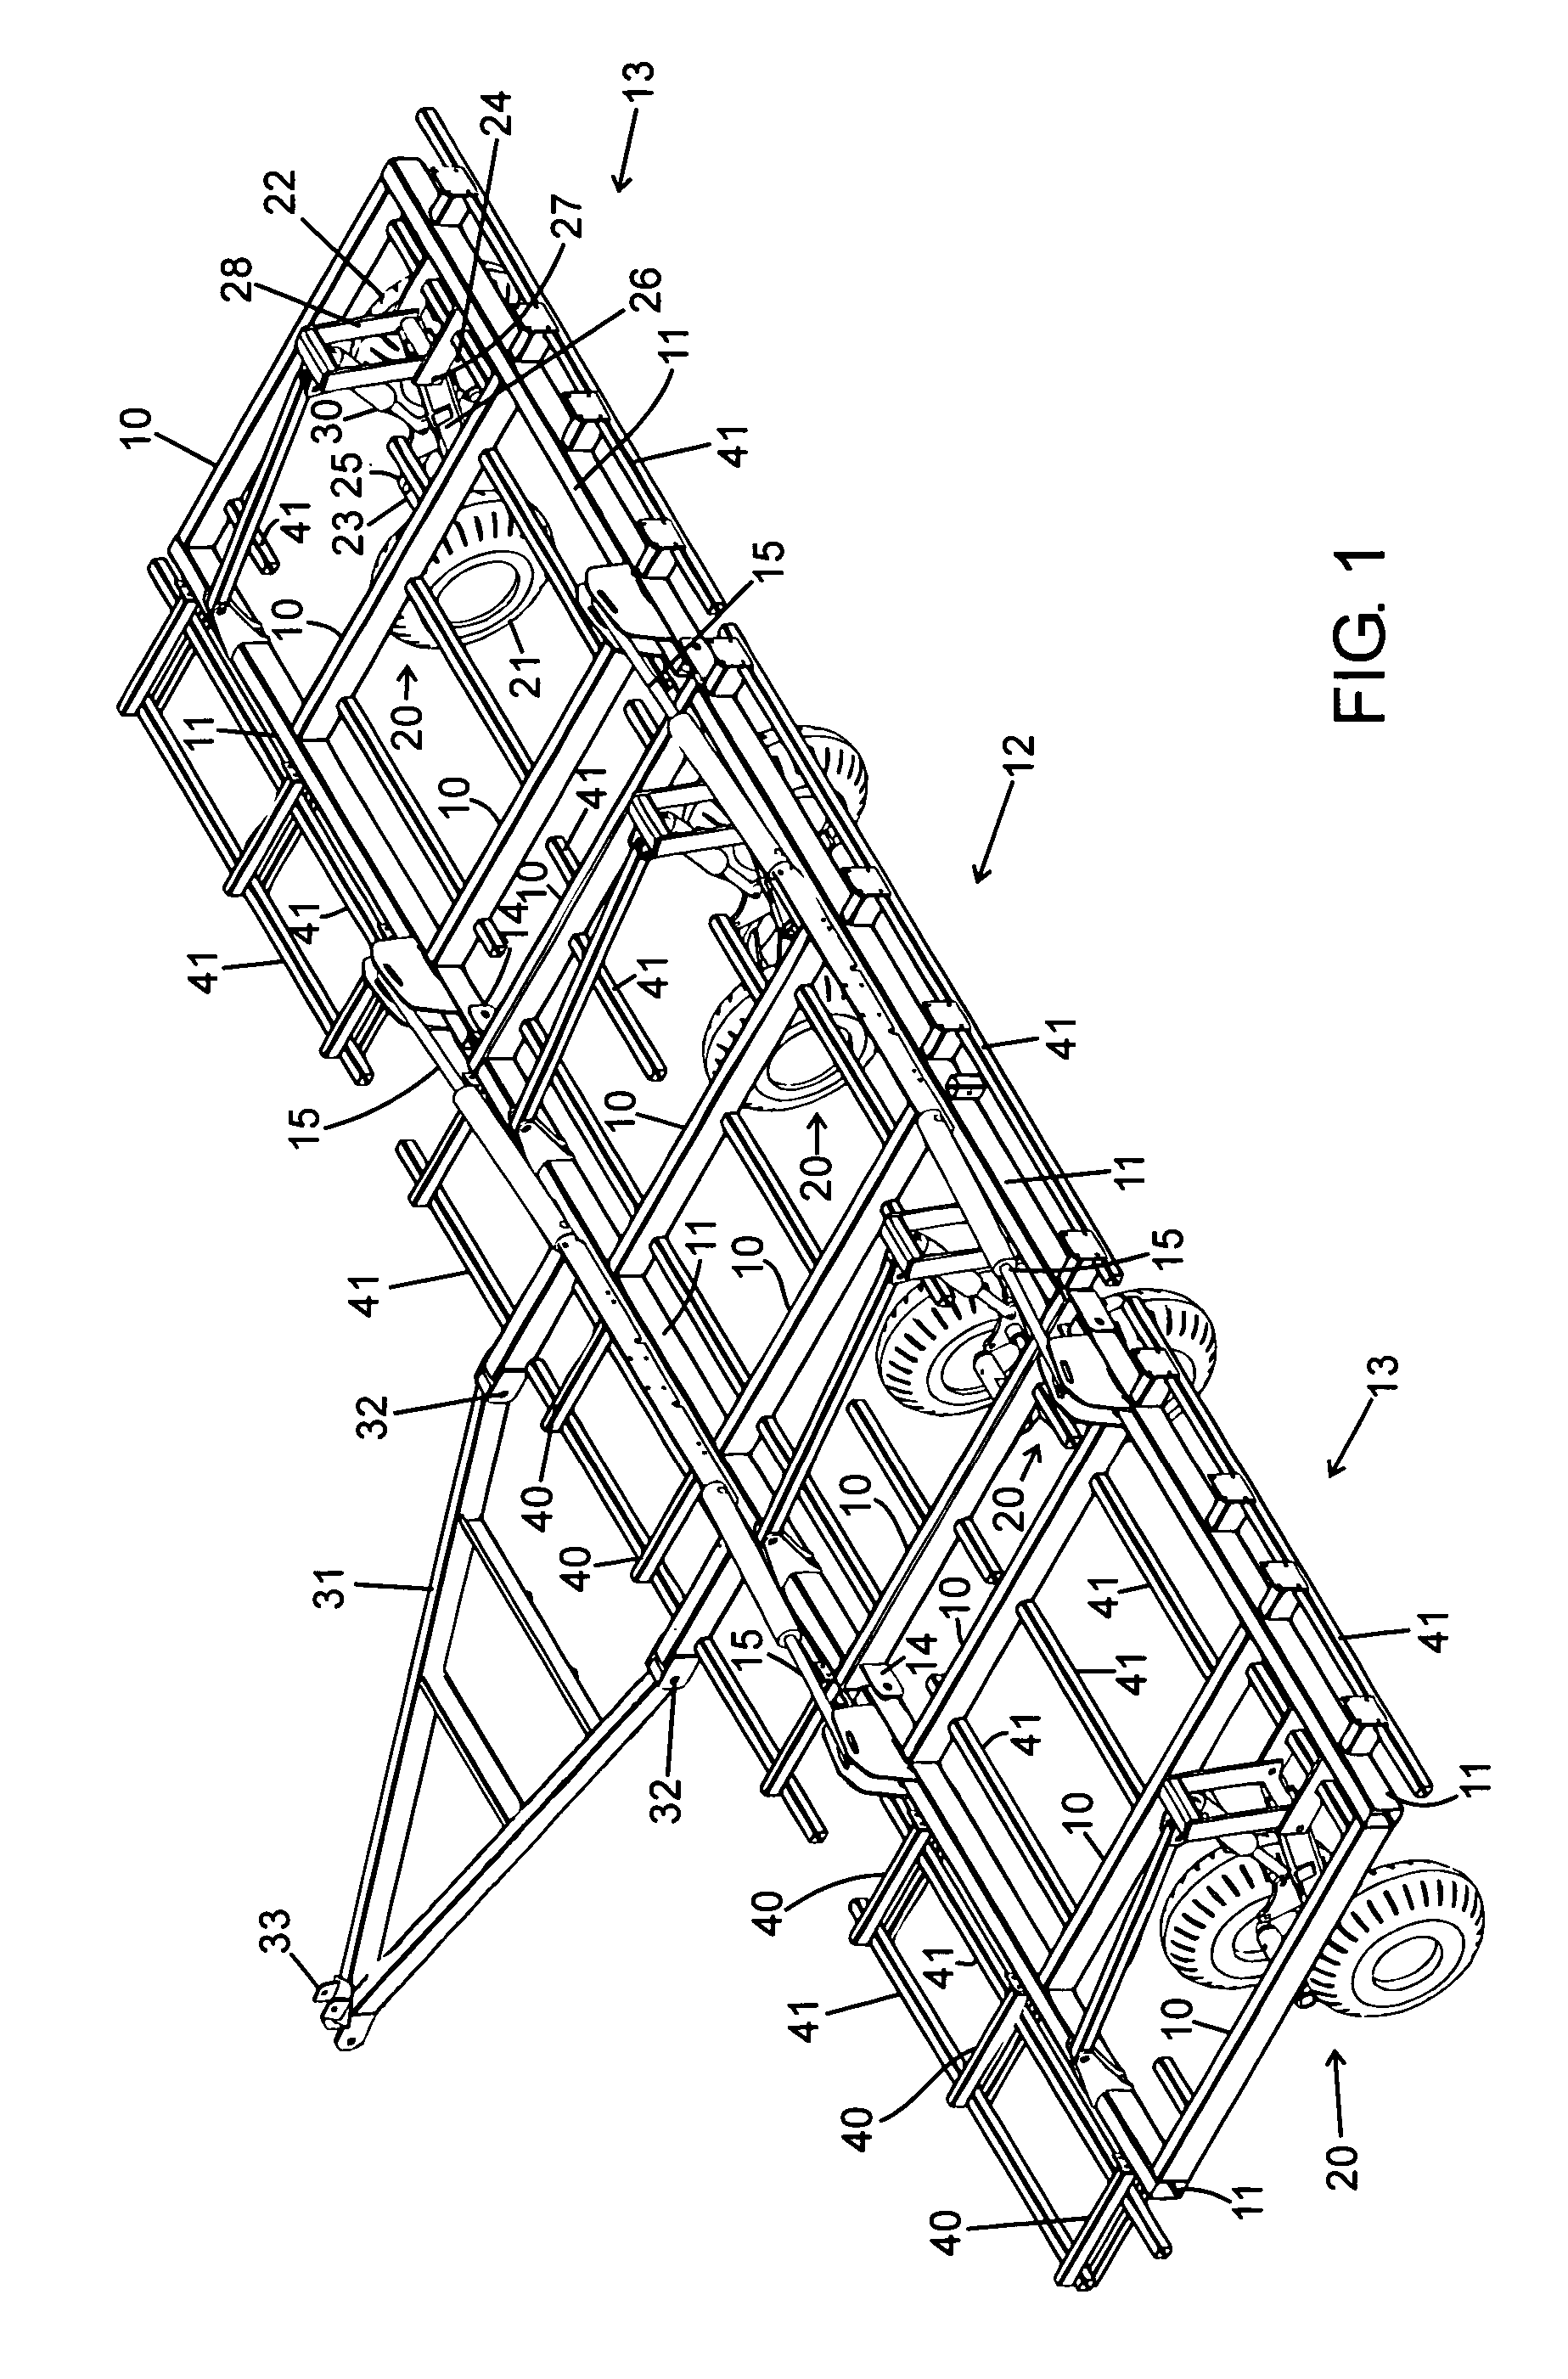 Conservation tillage implement, system and method